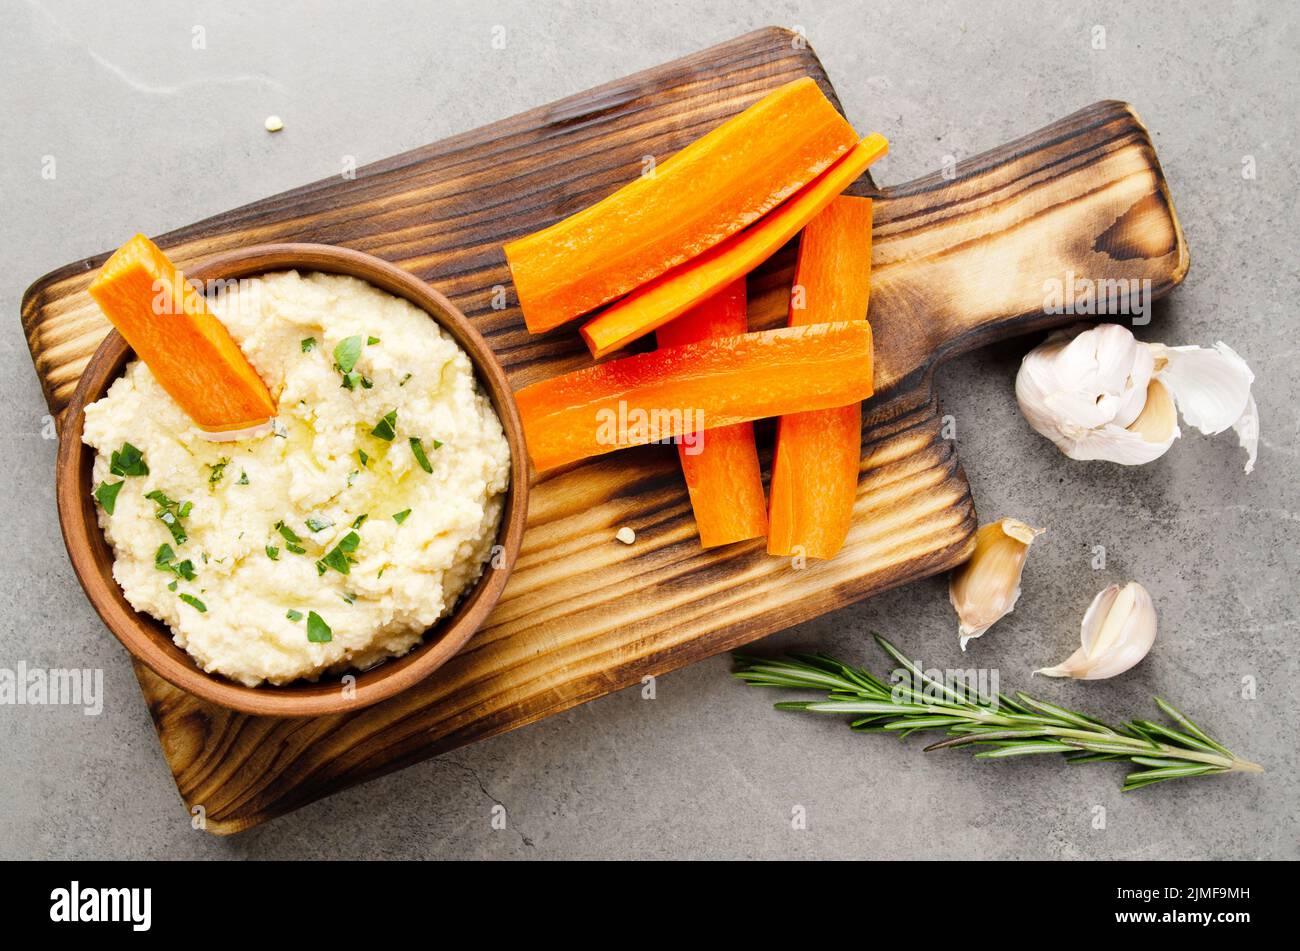 Flat lay view at vegetable Hummus dip dish topped with olive oil served with carrot slices Stock Photo